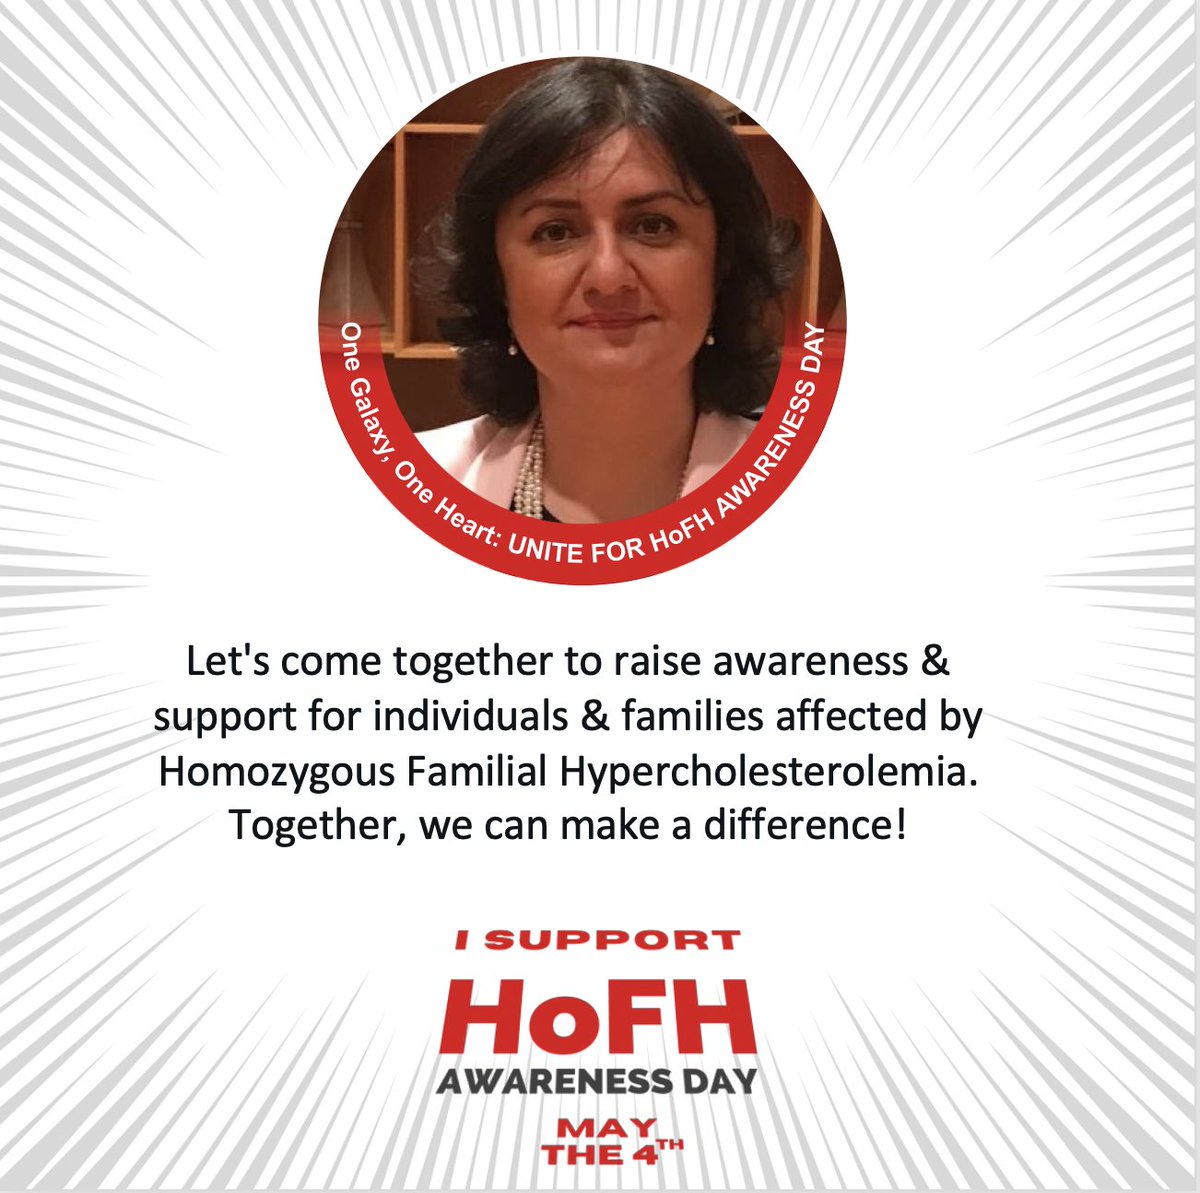 Starting today, May 4th will be recognized as #HoFH #AwarenessDay! Let's come together to raise awareness & support for individuals & families affected by Homozygous Familial Hypercholesterolemia. Together, we can make a difference! 💙 #HoFHawareness So proud to be part of…